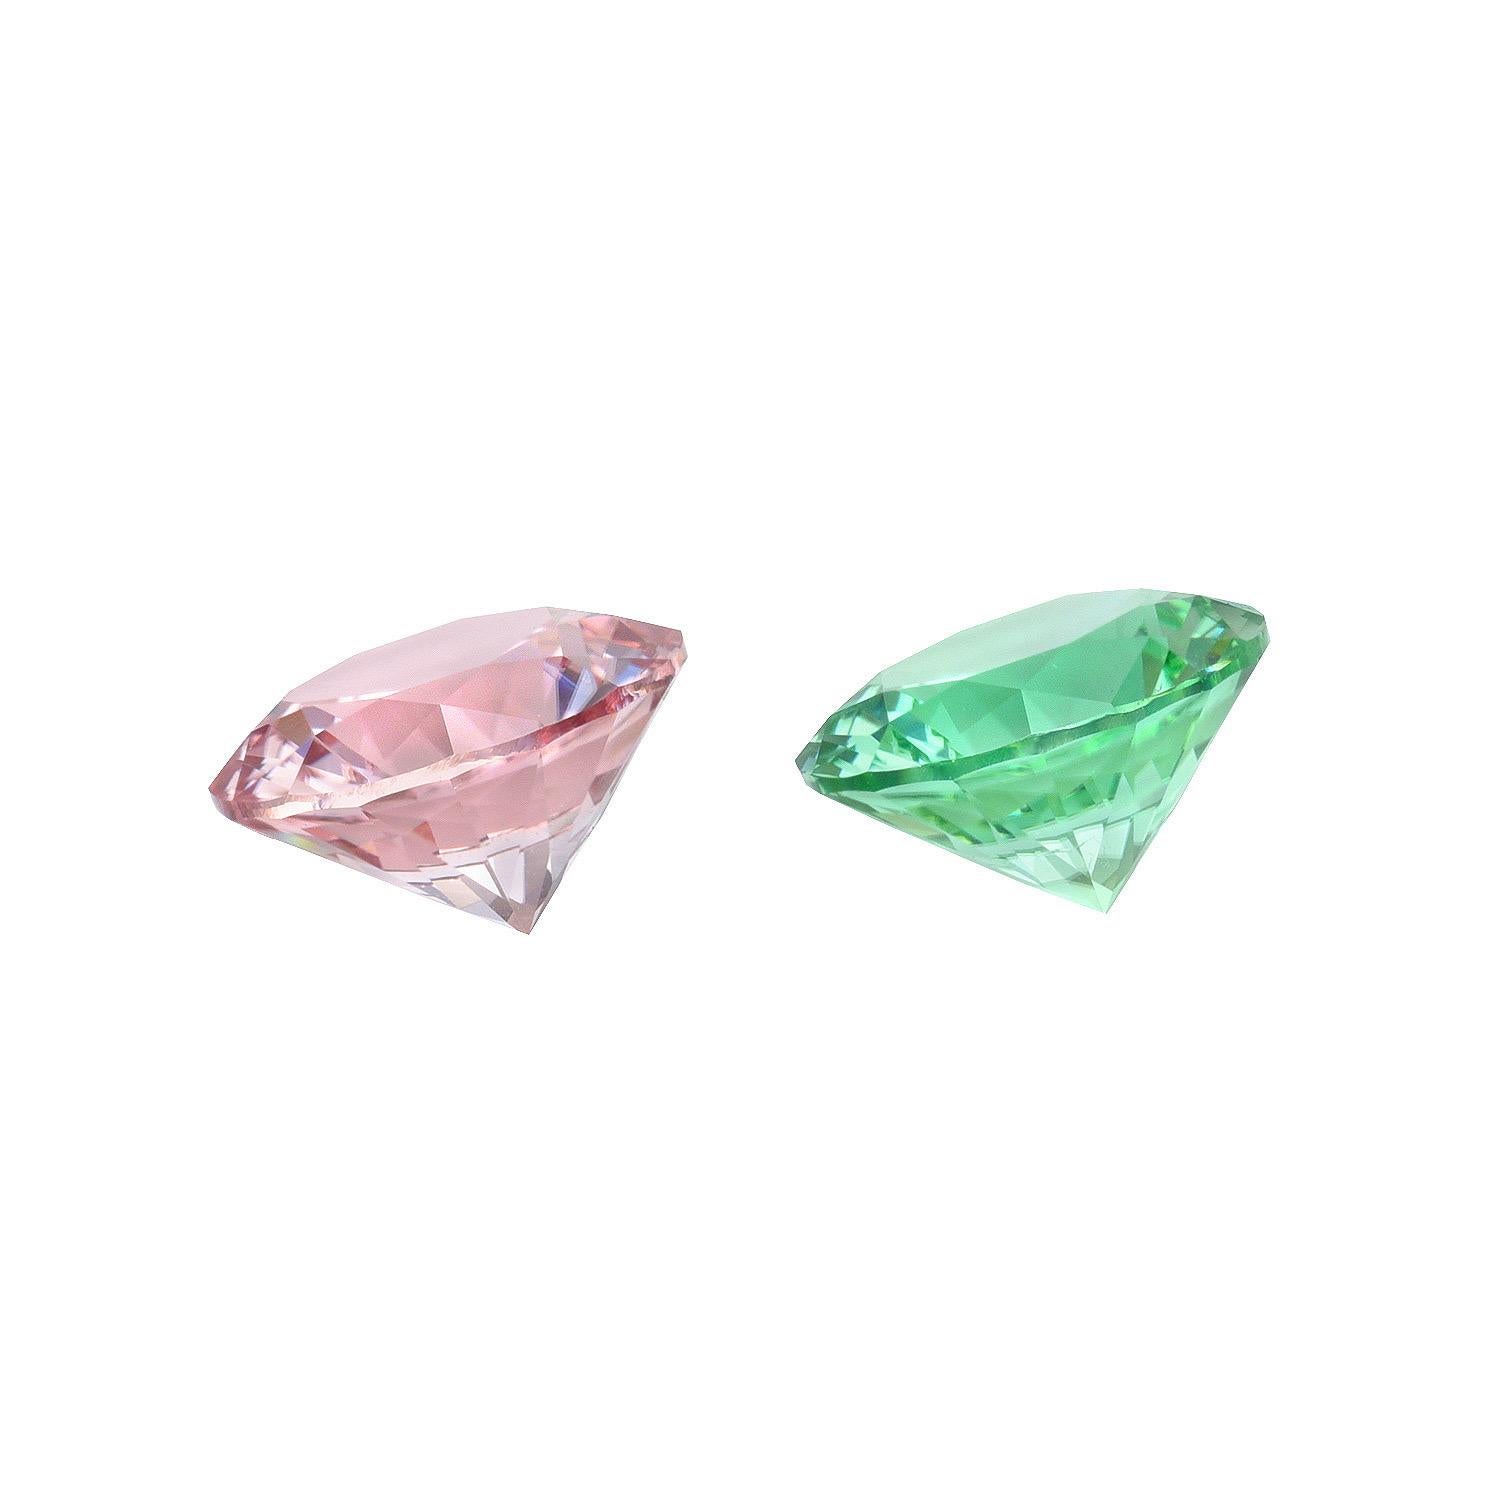 Perfectly mismatched pair of Pink and Green Tourmaline unmounted round gemstones, weighing a total of 1.96 carats. 
Dimensions: 6.7mm.
Returns are accepted and paid by us within 7 days of delivery.
We offer supreme custom jewelry work upon request.